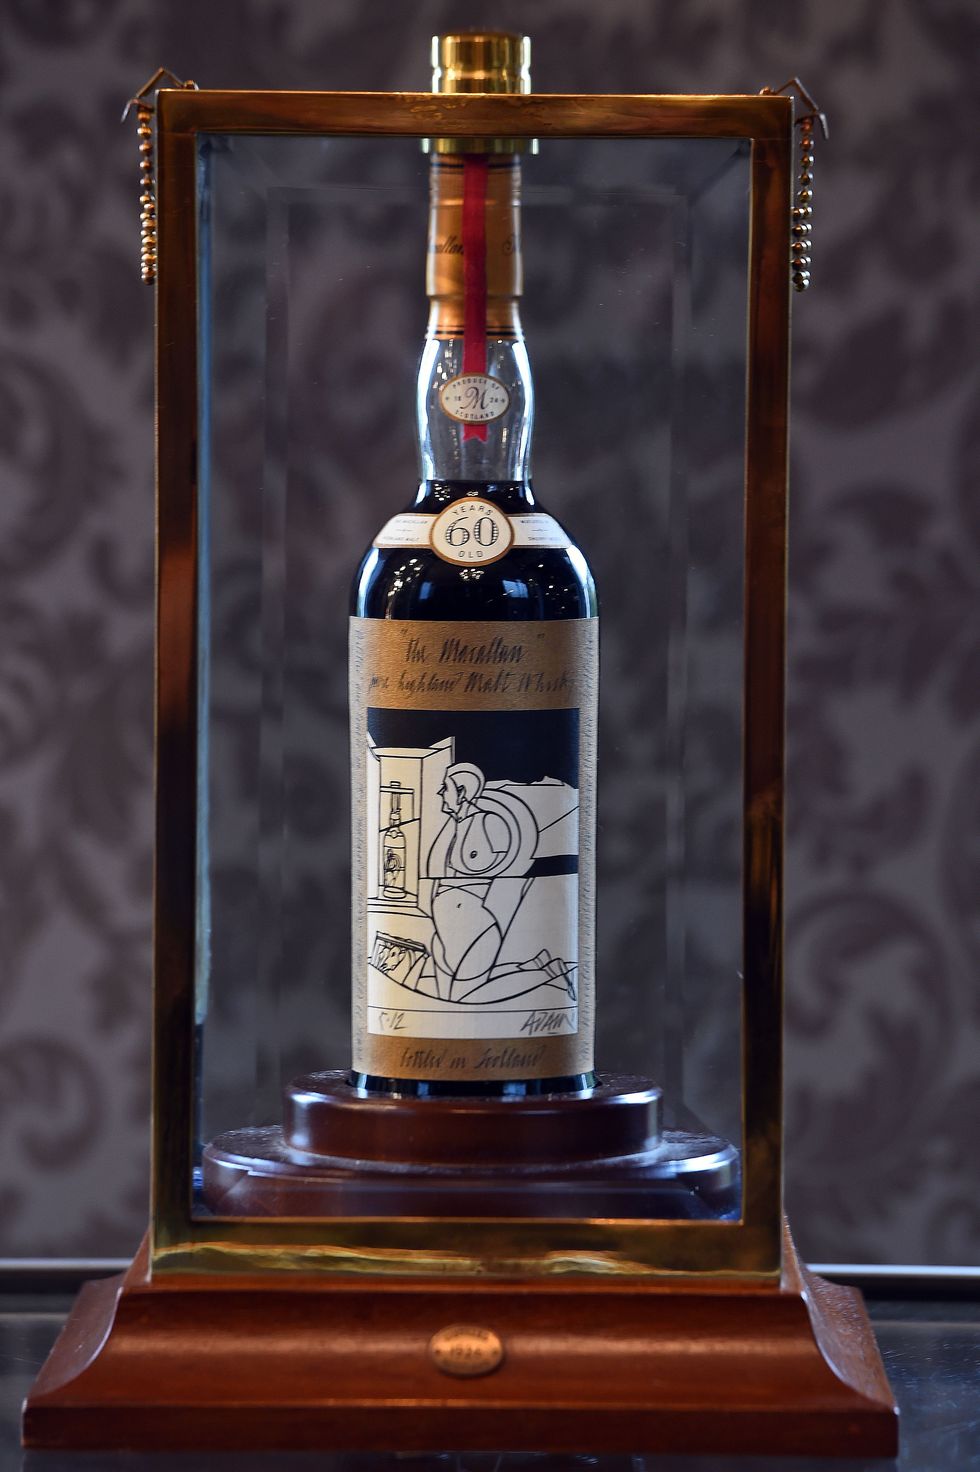 The World's Most Expensive Whisky Bottle Sold for 1.1 Million